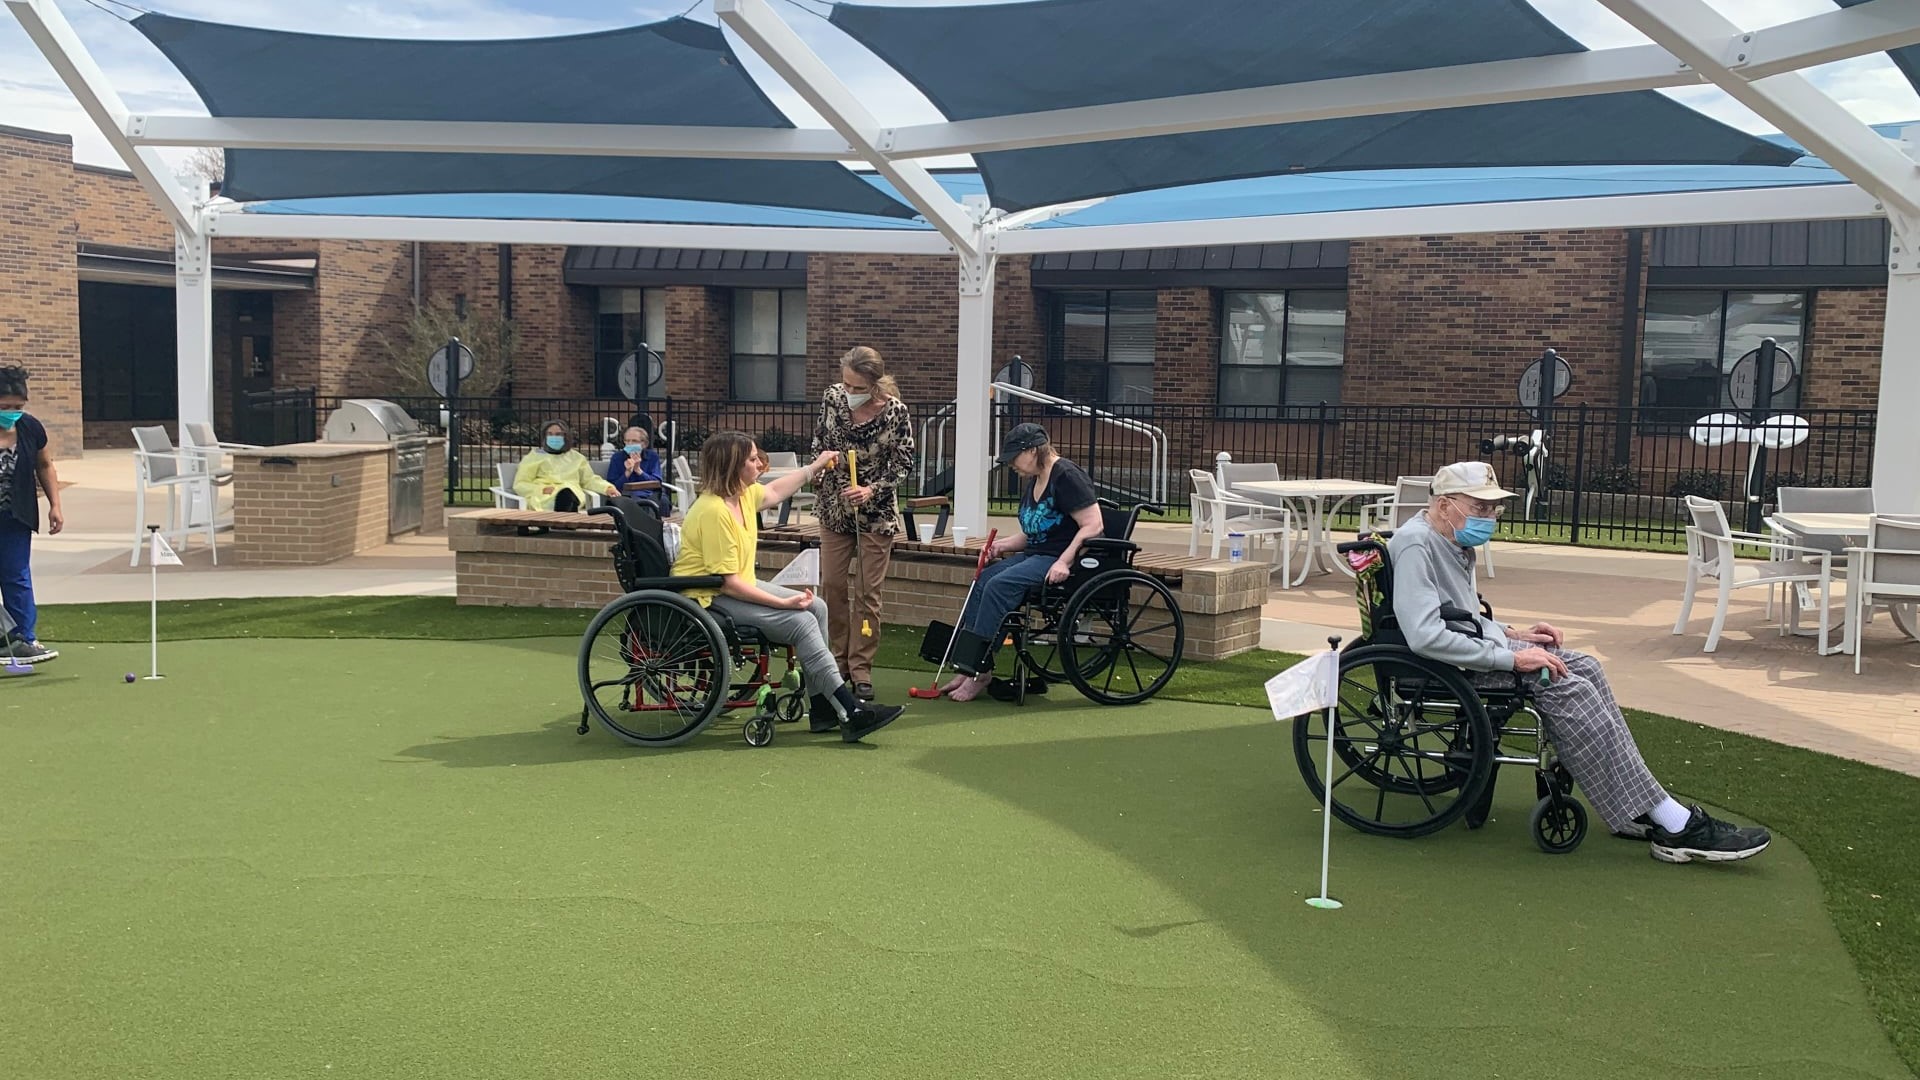 The new park features wheelchair accessible gardens, therapy exercise equipment and more.